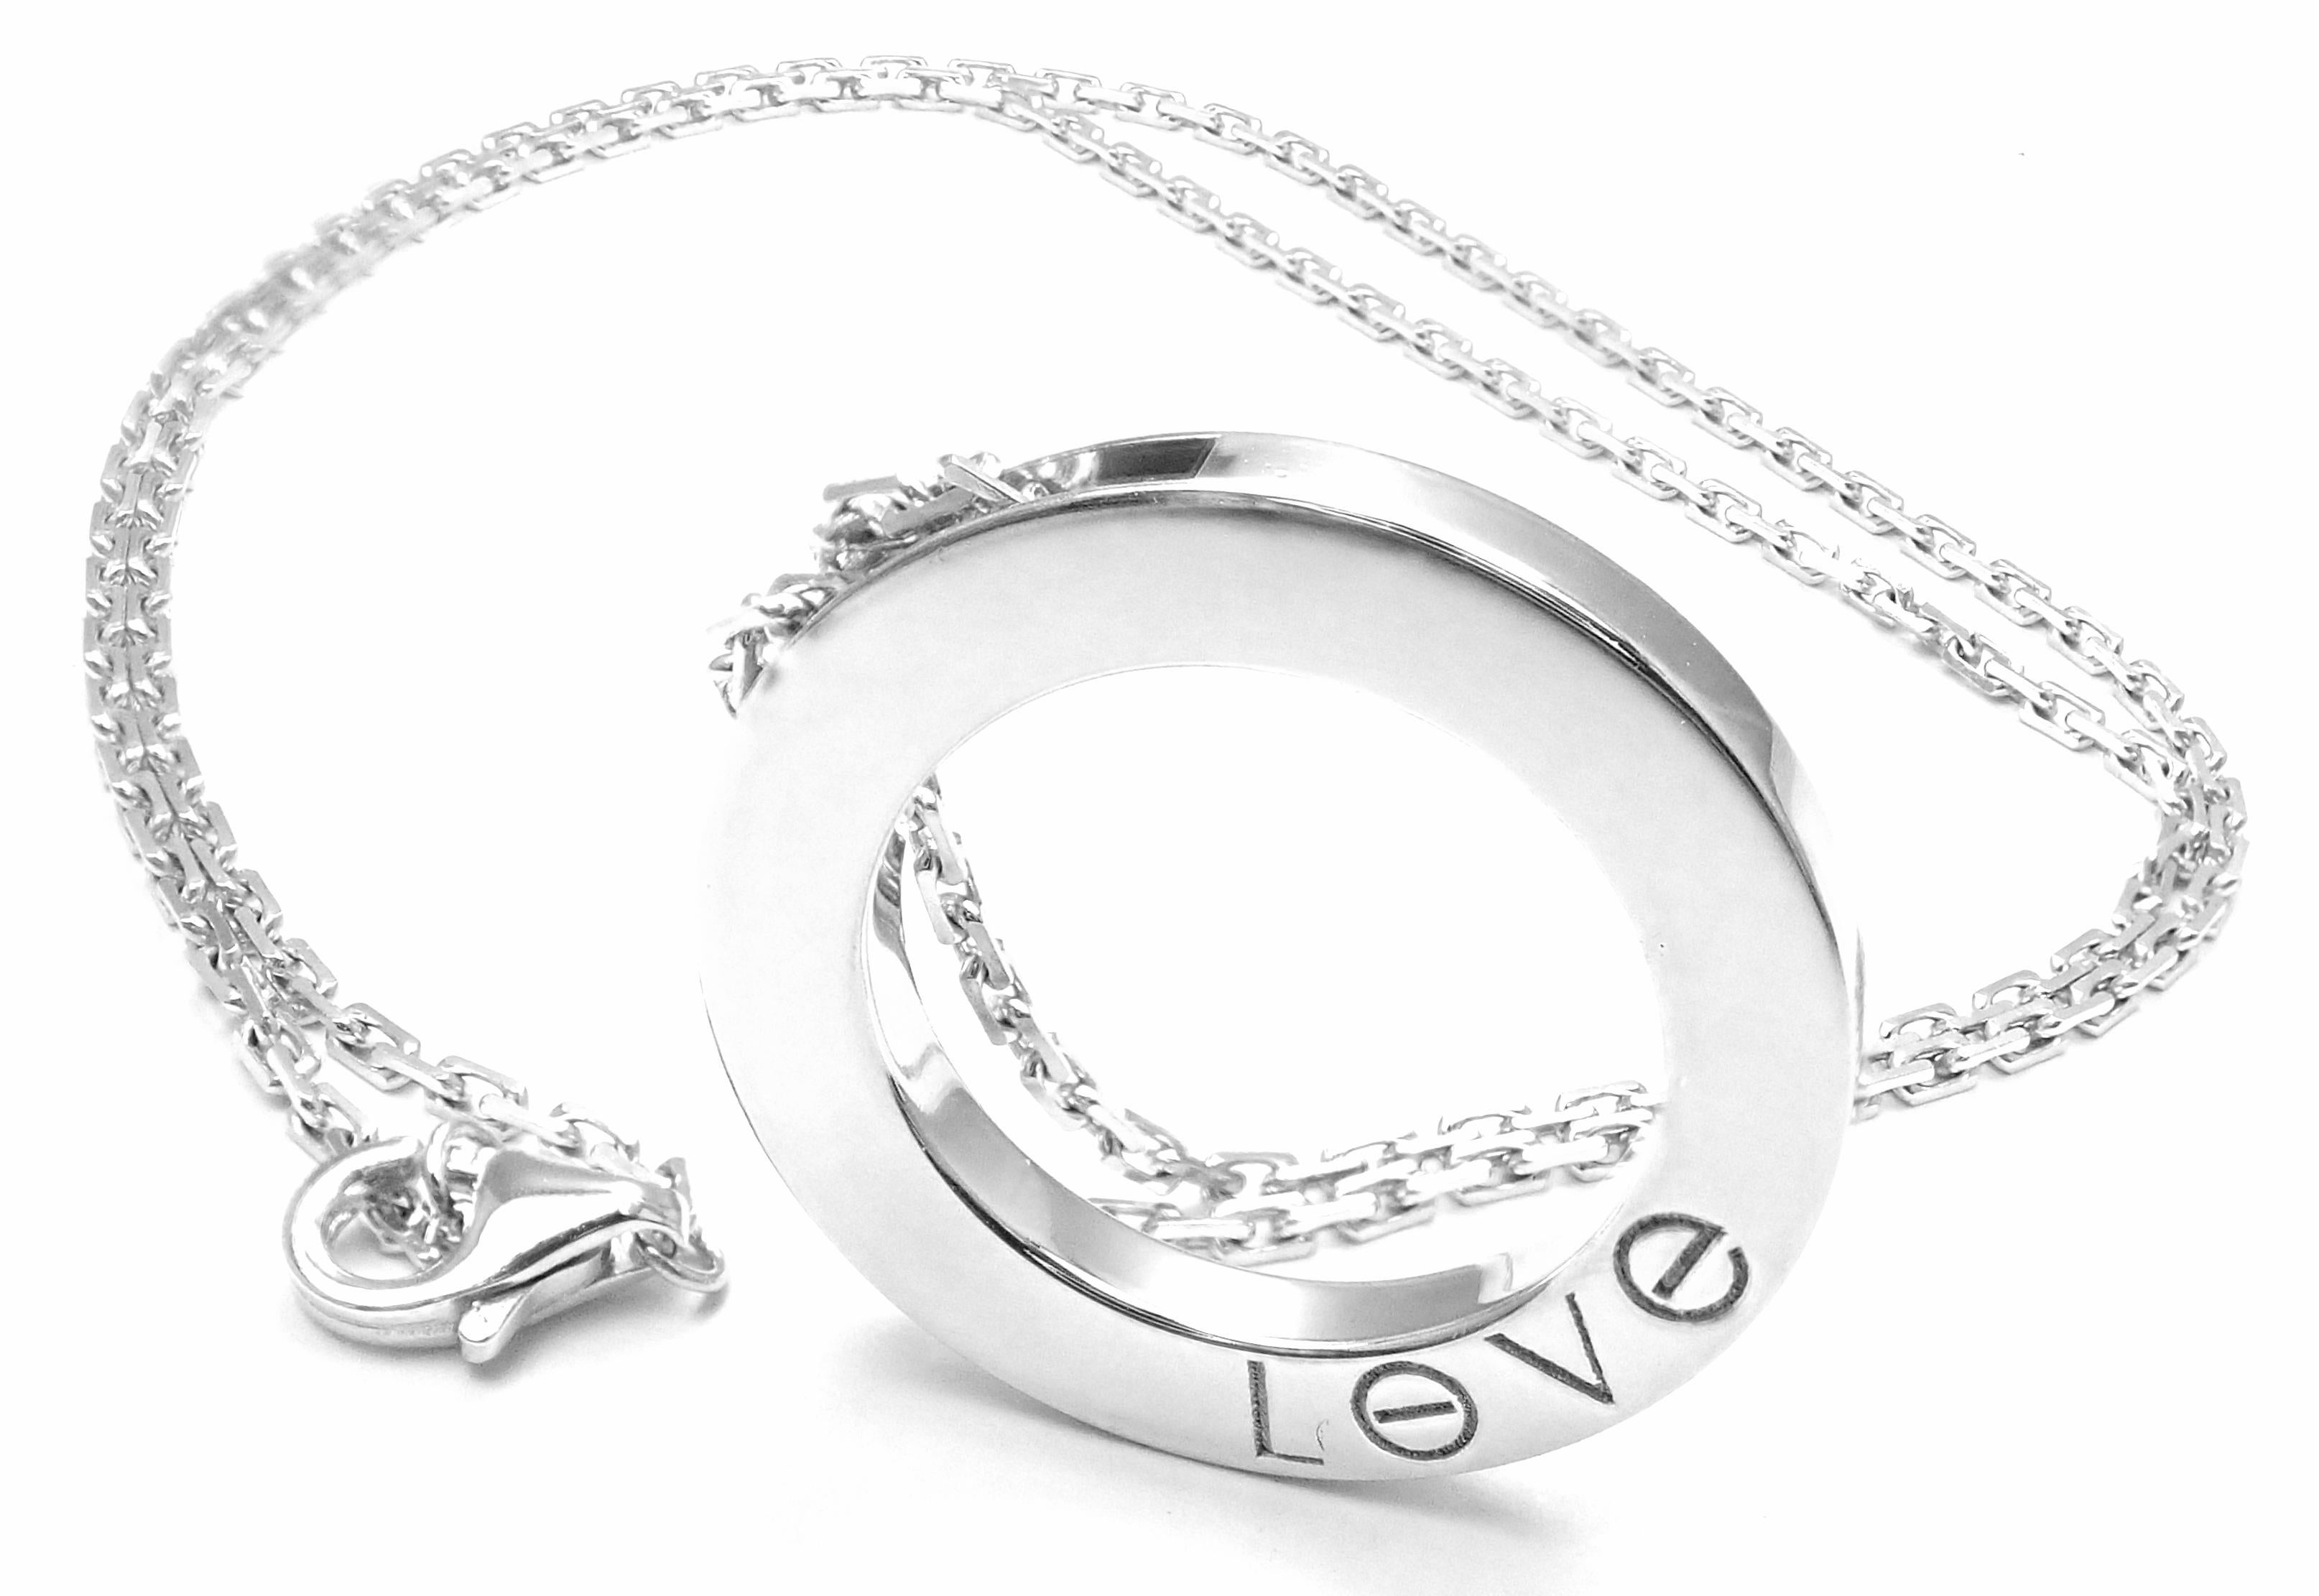 18k White Gold Diamond Love Circle Pendant Necklace by Cartier. 
With 3 round brilliant cut diamonds VS1 clarity, G color total weight .07ct
This pendant comes with Cartier certificate of authenticity.
Details: 
Pendant: 24mm
Length: 16 3/4